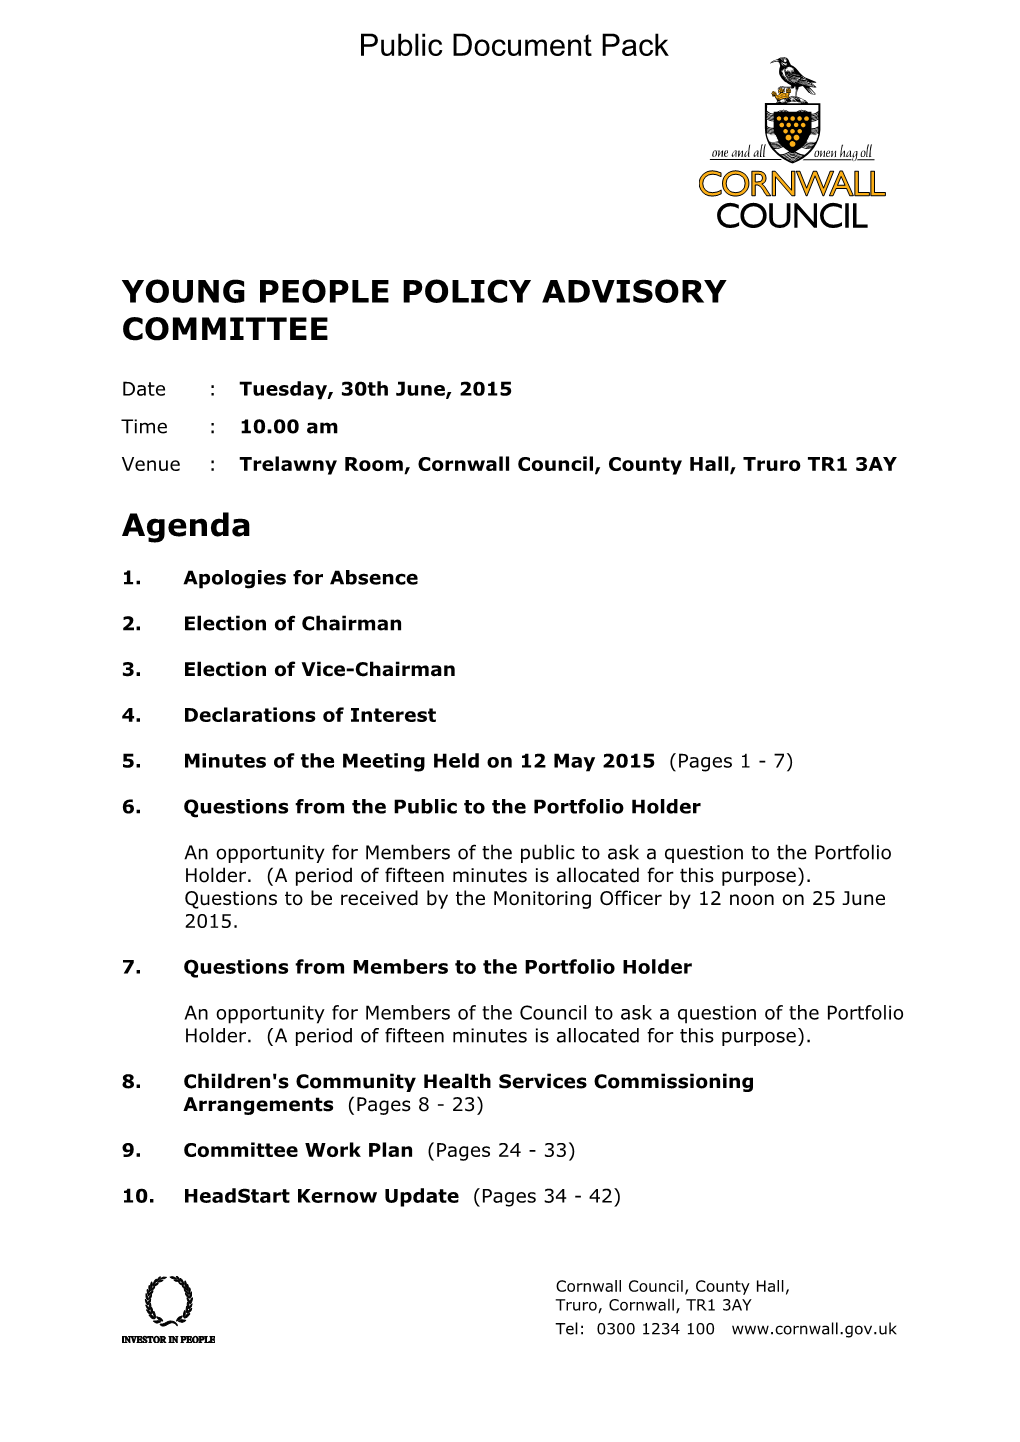 (Public Pack)Agenda Document for Young People Policy Advisory